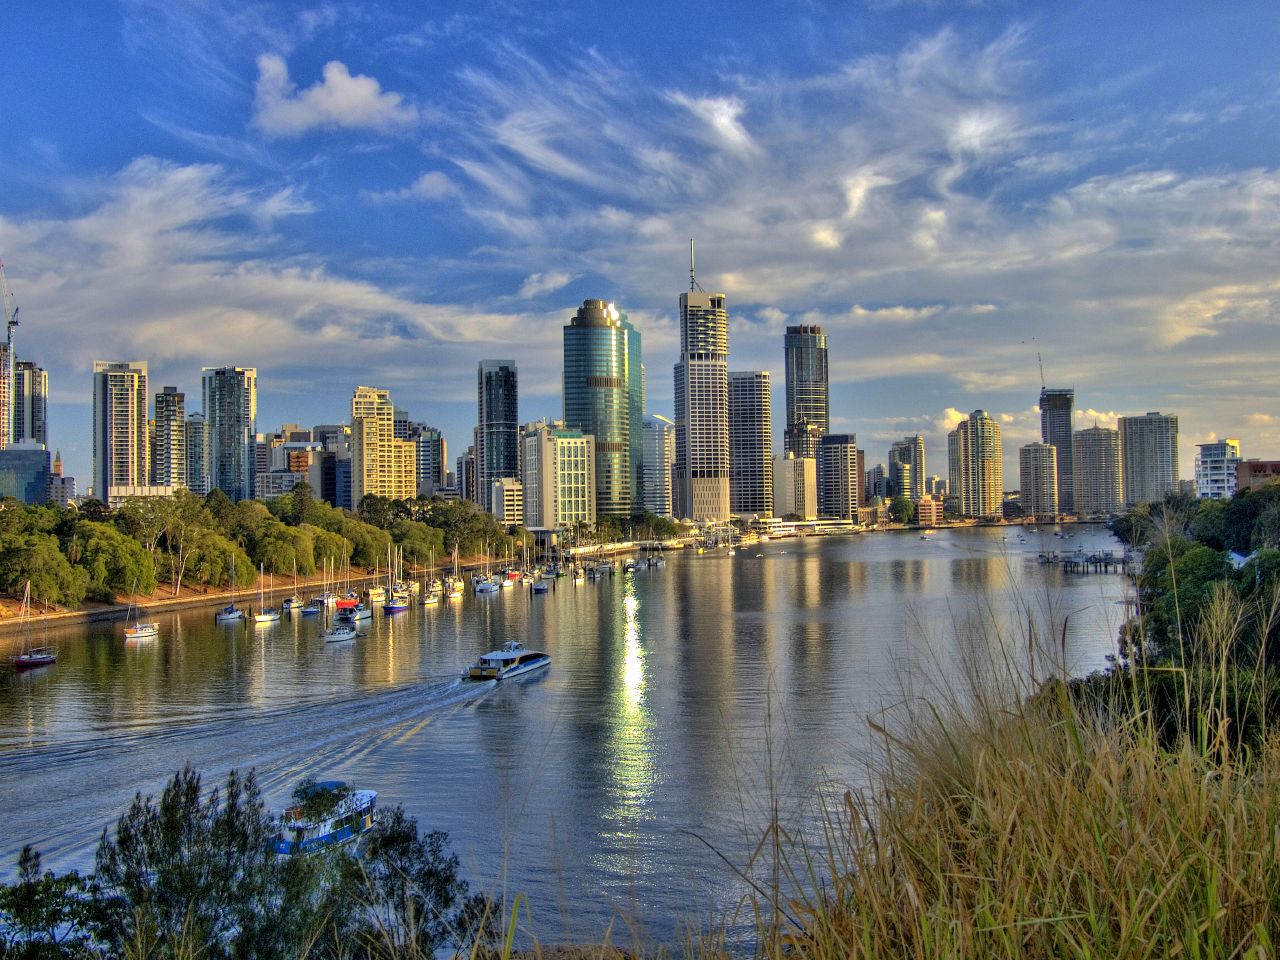 "Brisbane" by Christolakis is licensed under CC BY-NC-ND 2.0